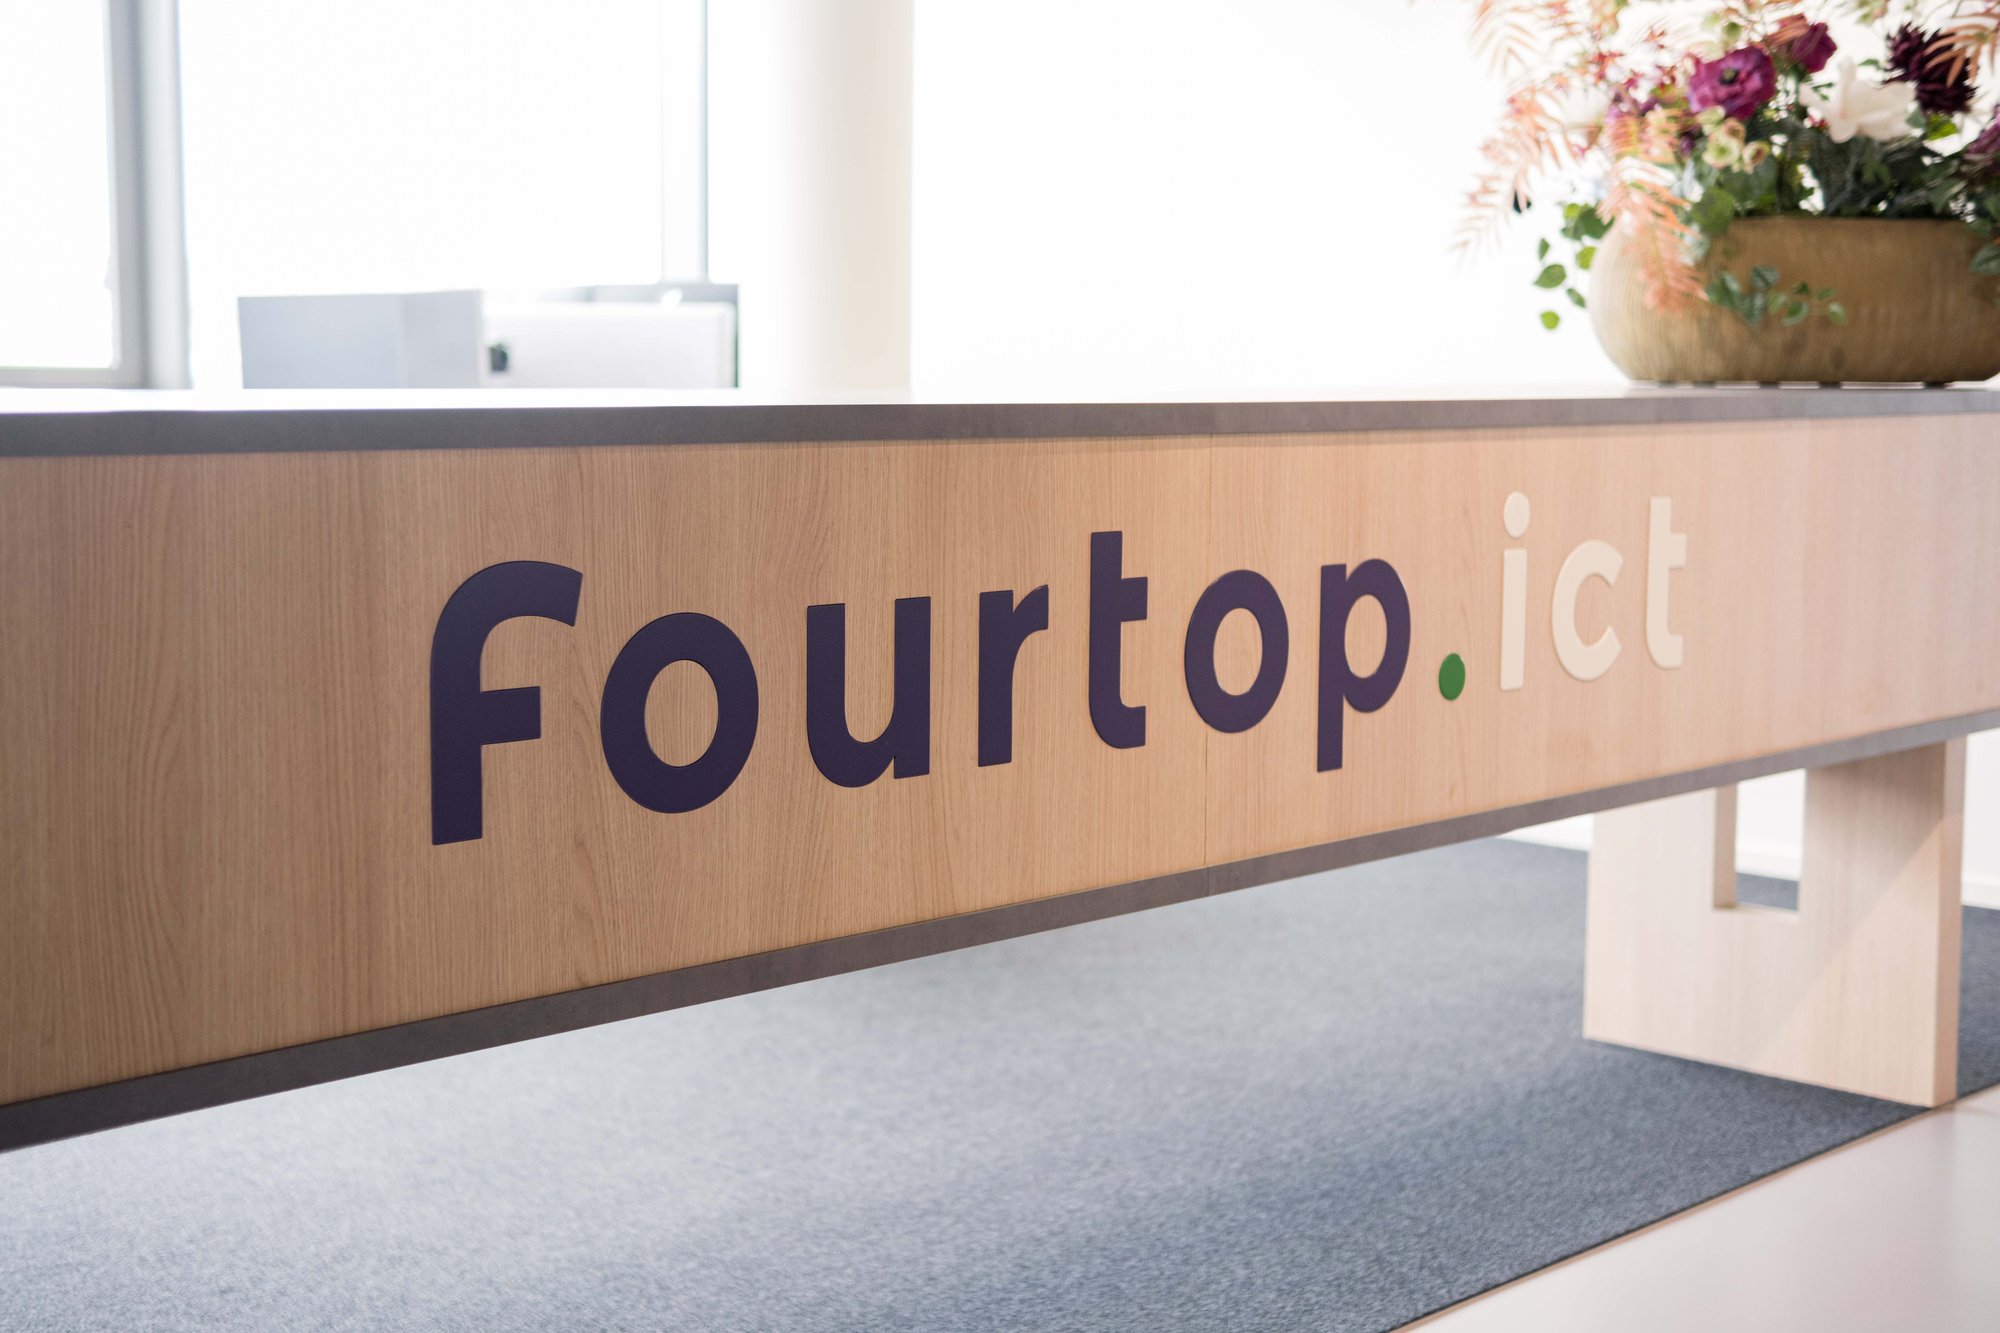 We stay connected | FAQ | Fourtop ICT